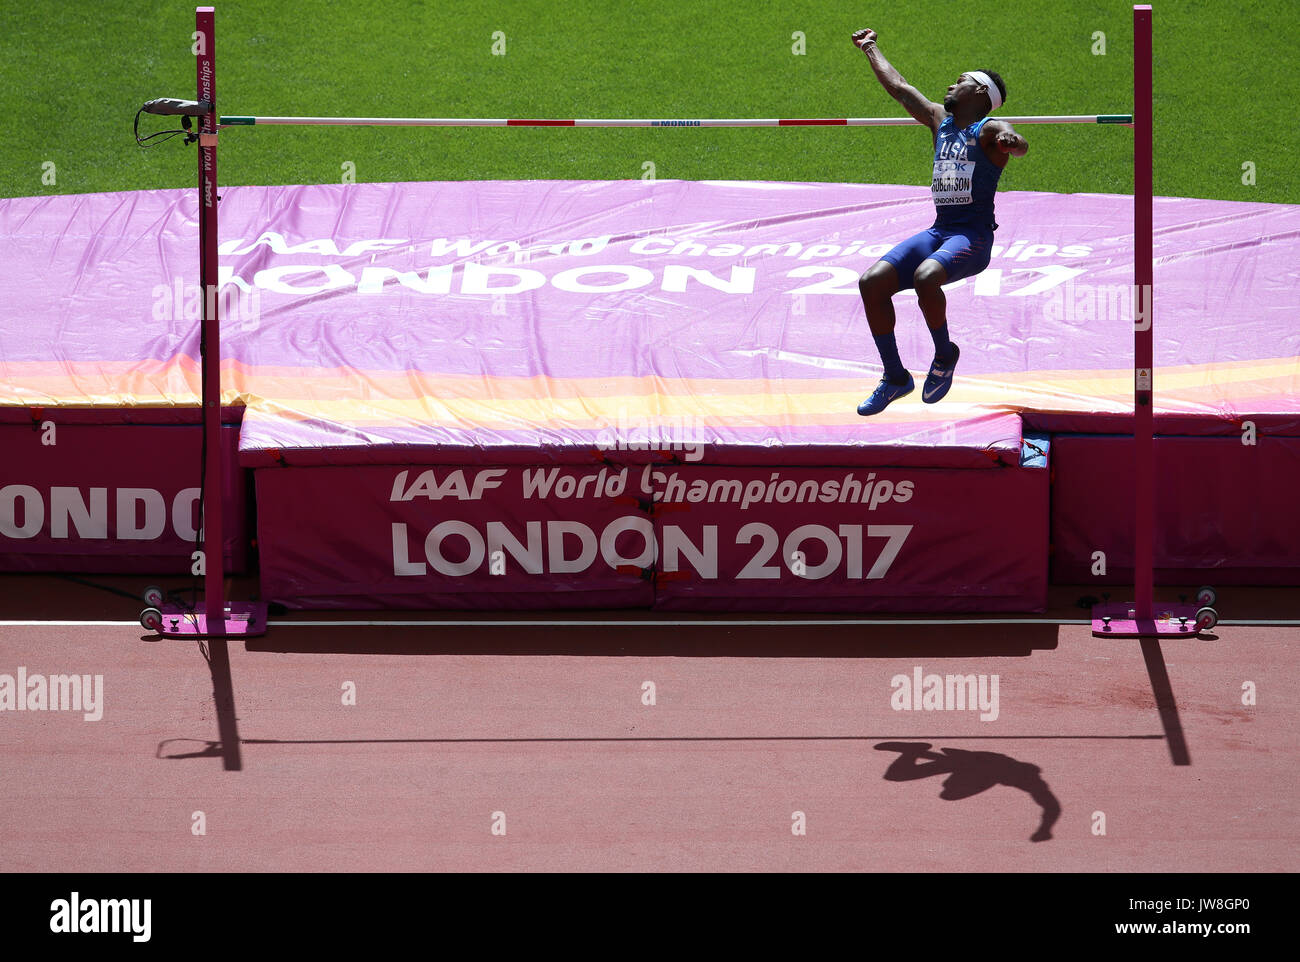 USA's Ricky Robertson competes in the Men's High Jump heats during day eight of the 2017 IAAF World Championships at the London Stadium. PRESS ASSOCIATION Photo. Picture date: Friday August 11, 2017. See PA story ATHLETICS World. Photo credit should read: Martin Rickett/PA Wire. RESTRICTIONS: Editorial use only. No transmission of sound or moving images and no video simulation. Stock Photo